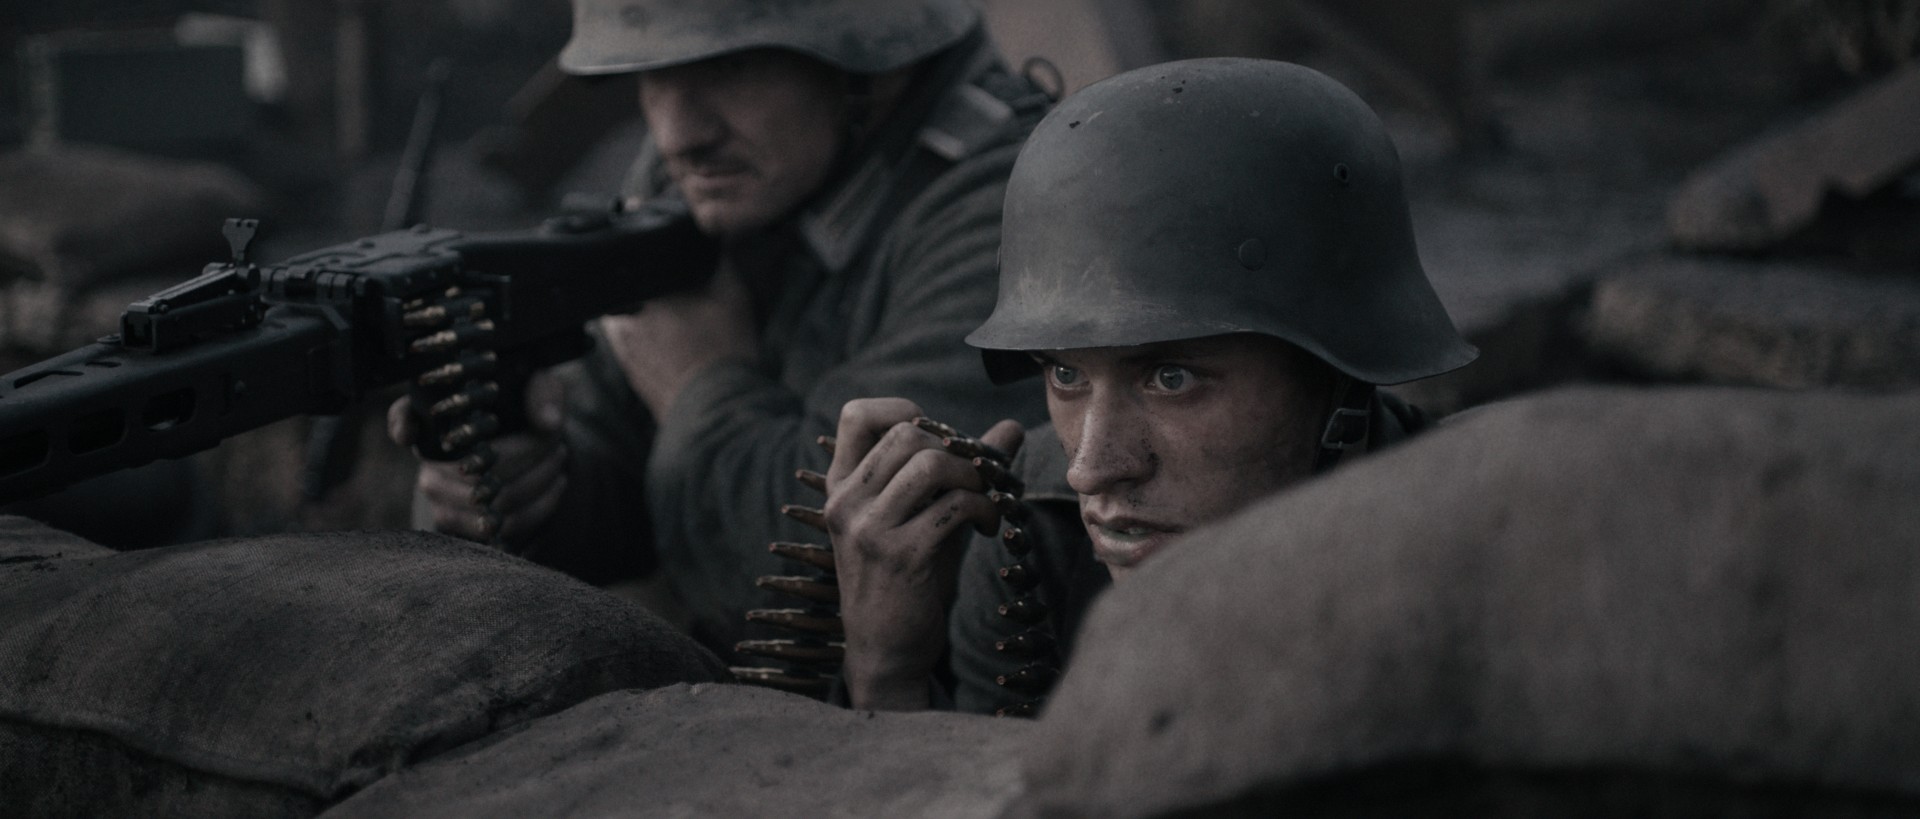 Still from the film De Slag om de Schelde/The Forgotten Battle. Marinus is crouched down in the front lines of a battle field, holding the ammo for a rifle next to him.